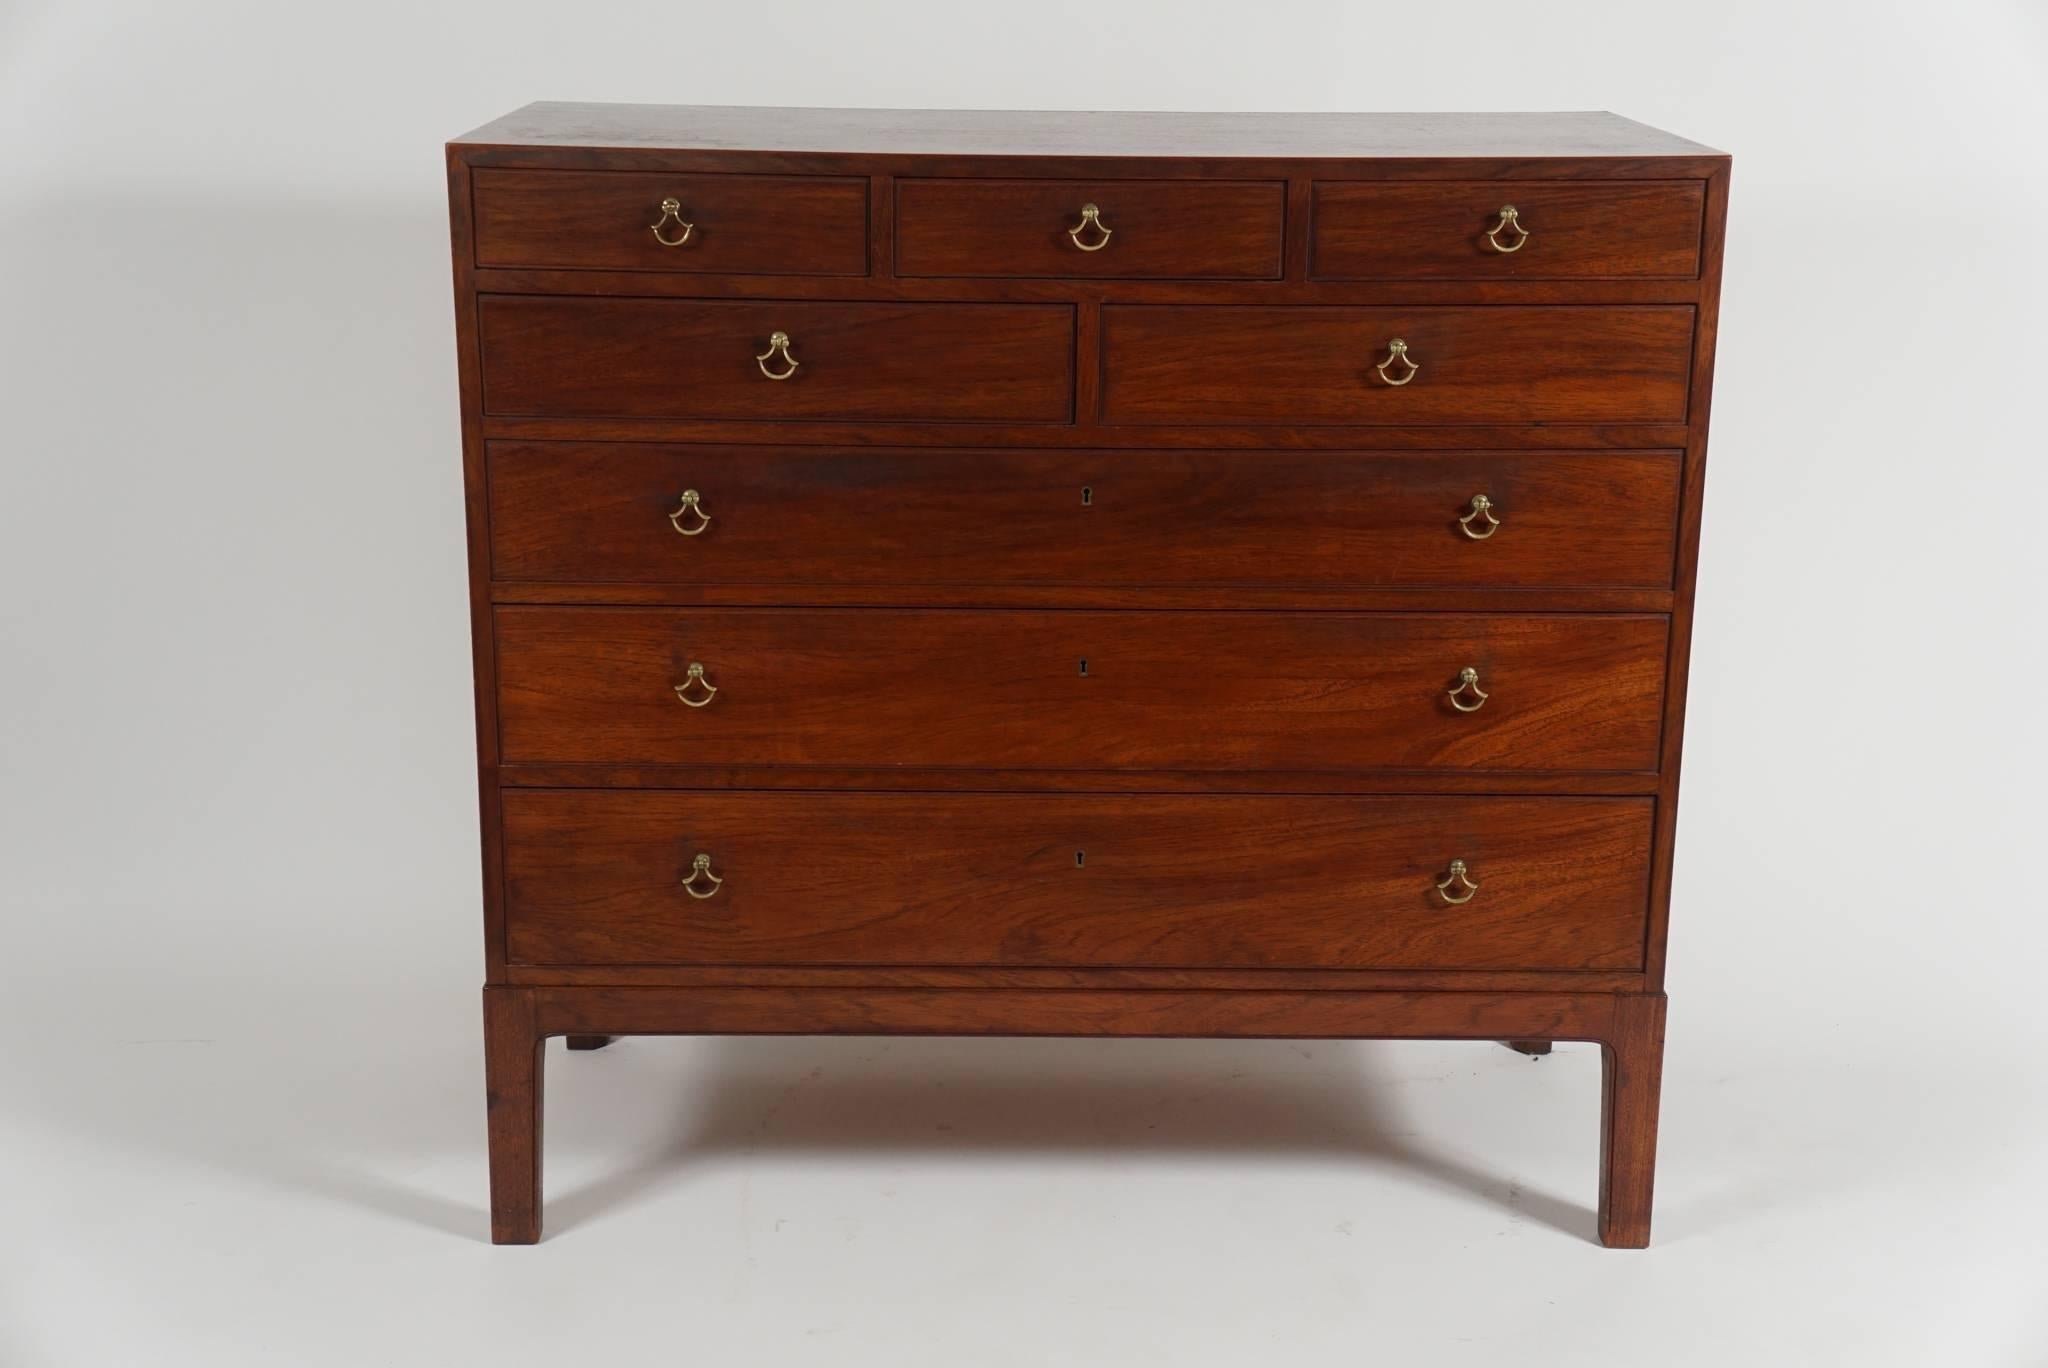 Borrowing inspiration from two legendary cabinet-making traditions, that of the English Georgian period and the Chinese Ming dynasty, this elegant solid mahogany chest of drawers by important female Danish Mid-Century designer Birte Iversen,